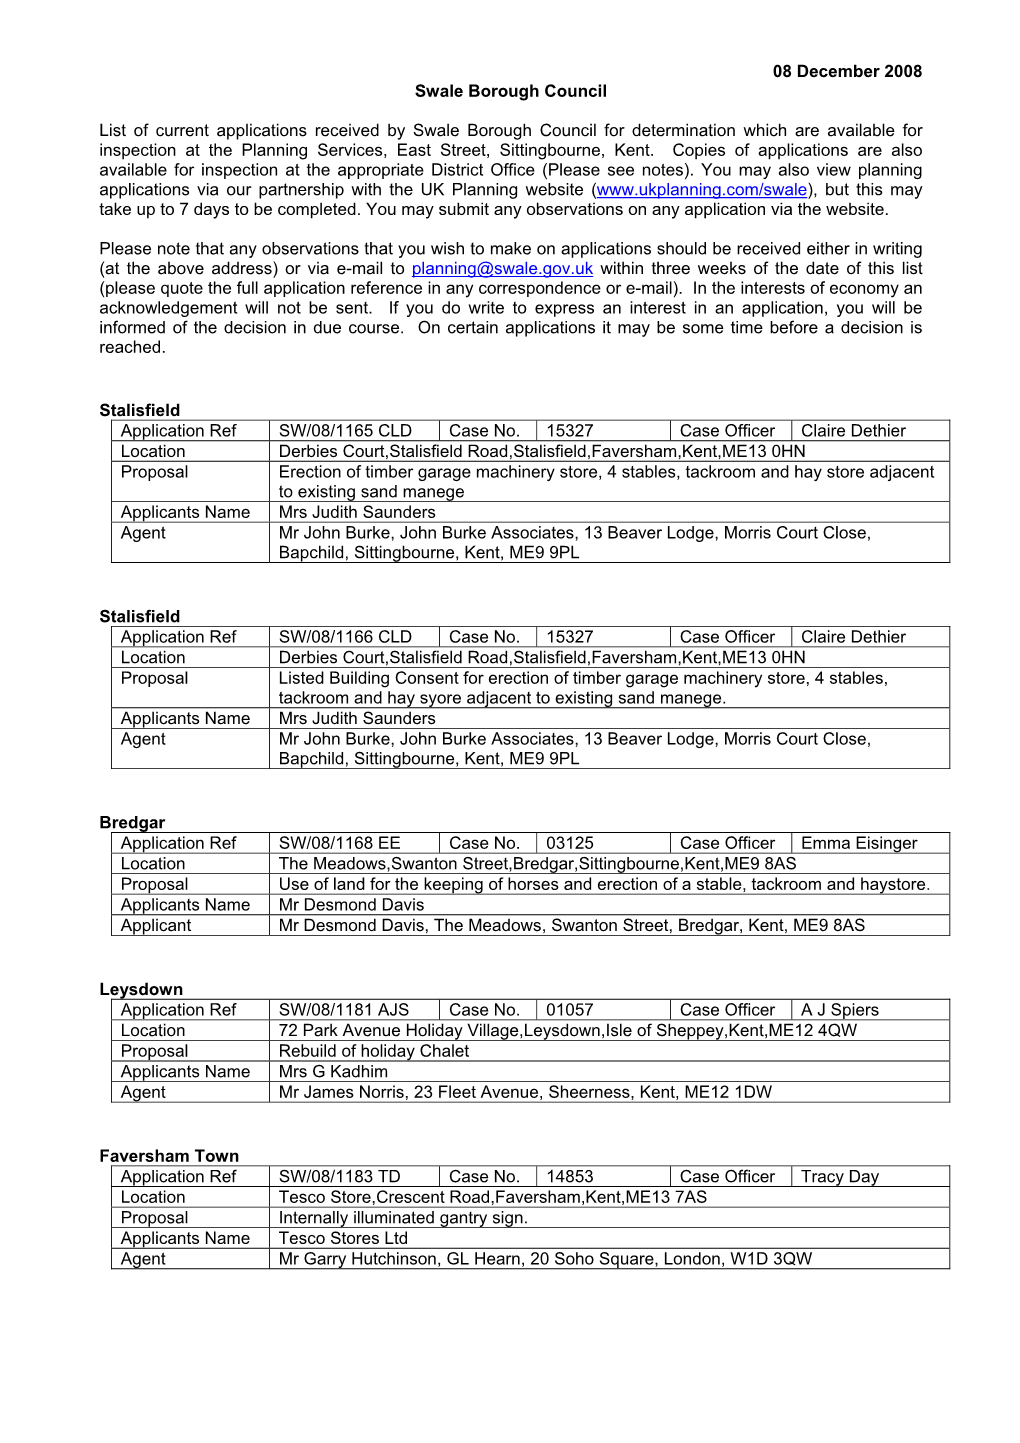 08 December 2008 Swale Borough Council List of Current Applications